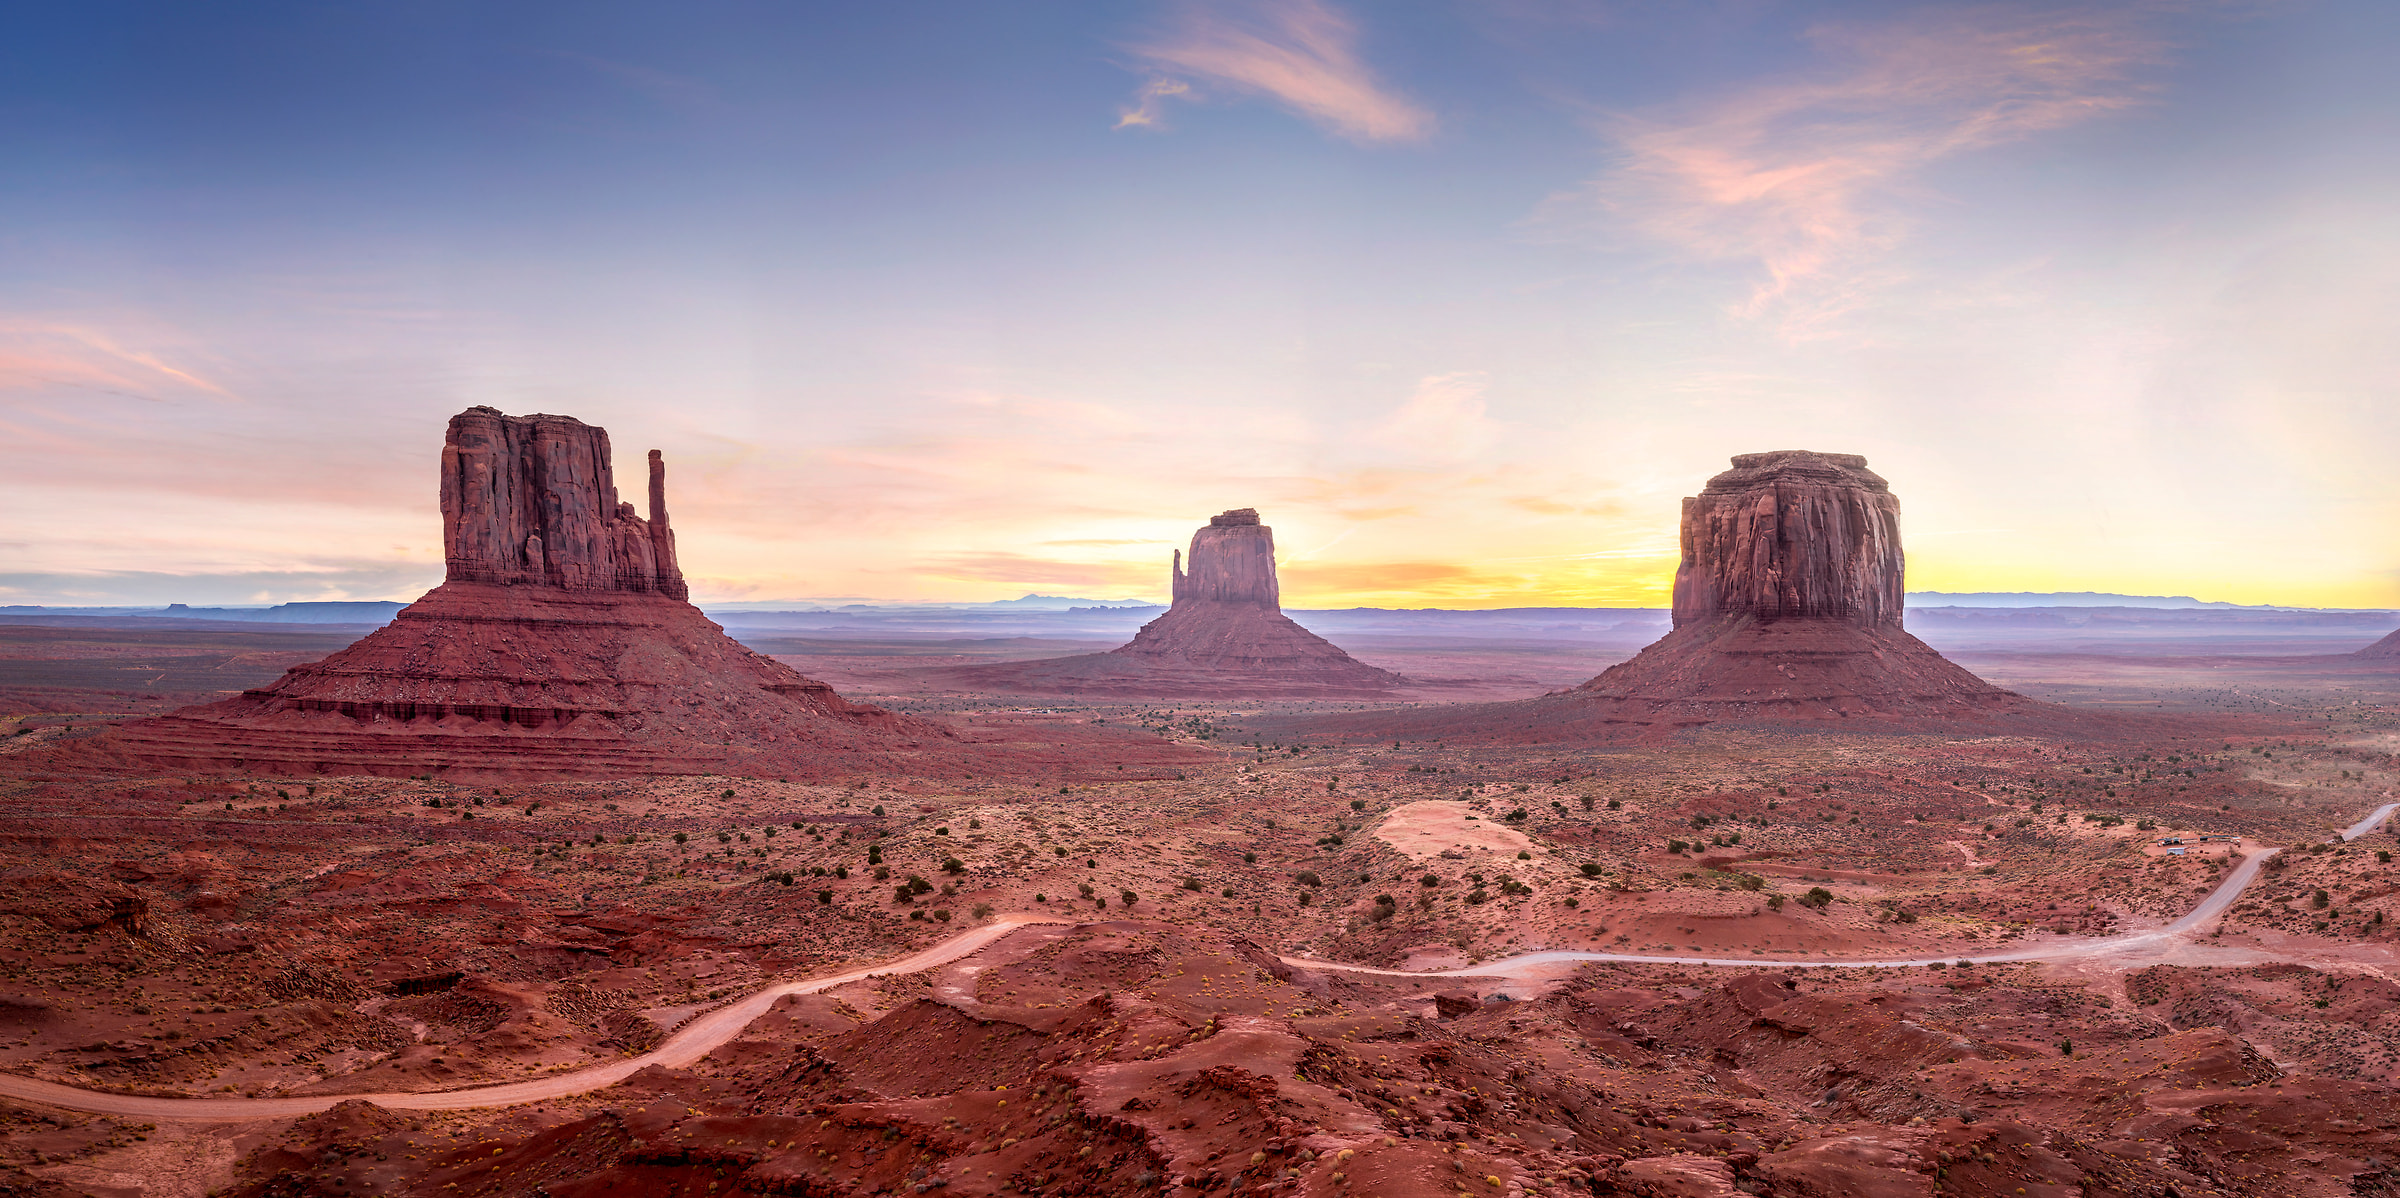 345 megapixels! A very high resolution, large-format VAST photo print of an American landscape scene from the western USA; photo created by Justin Katz in Monument Valley, Utah and Arizona